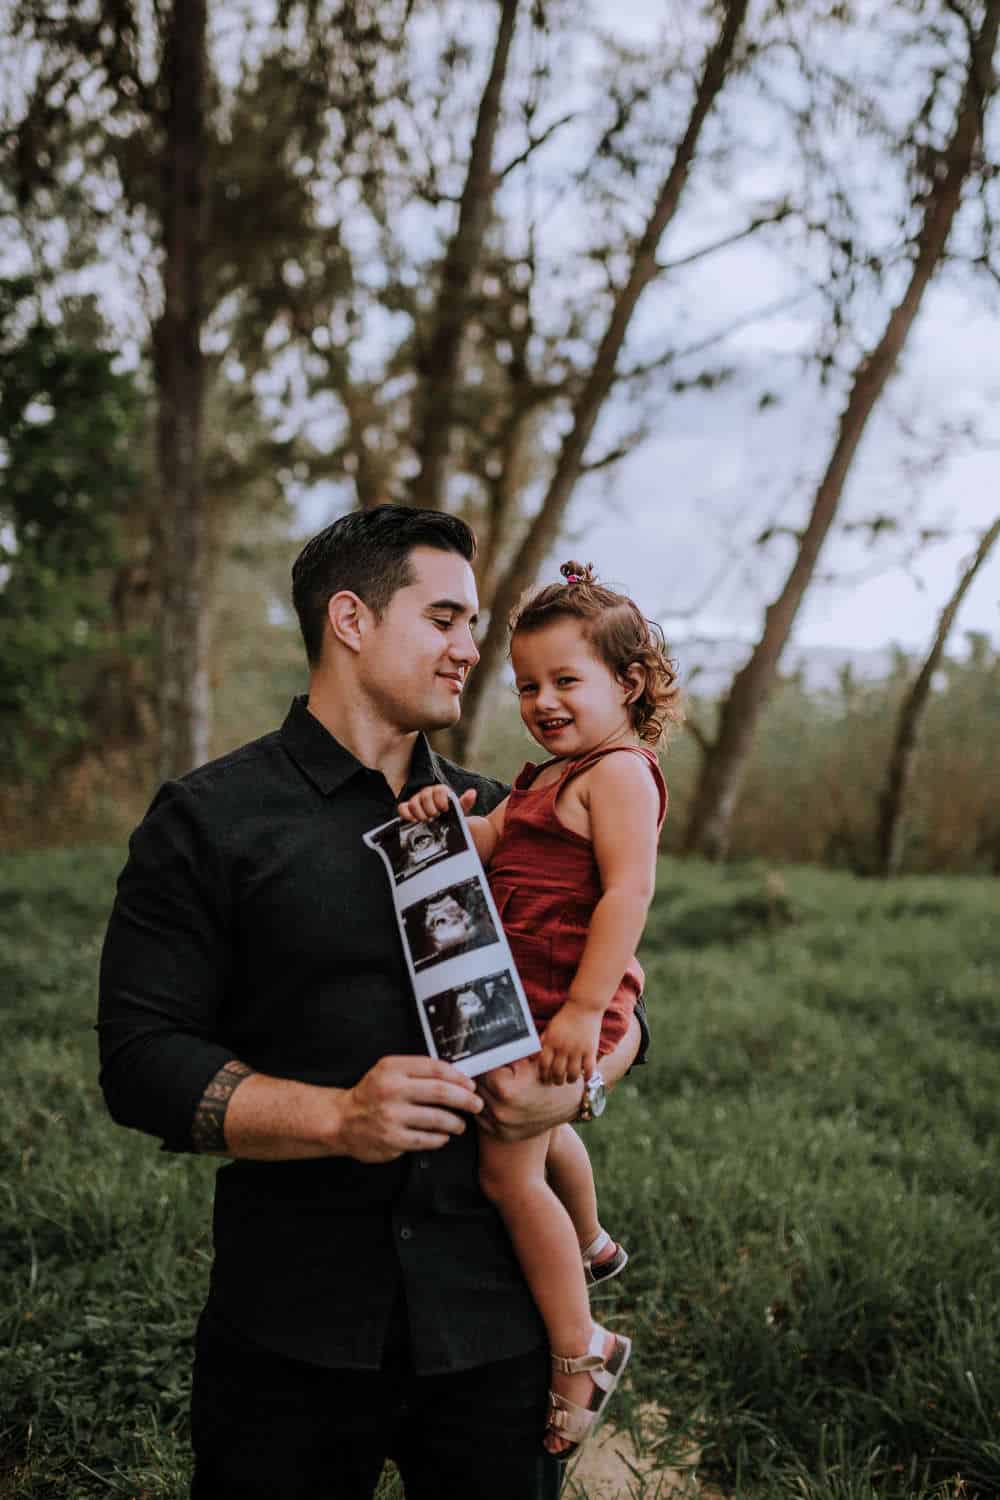 dad and daughter photo session in Hawaii revealing gender of the next baby on the way